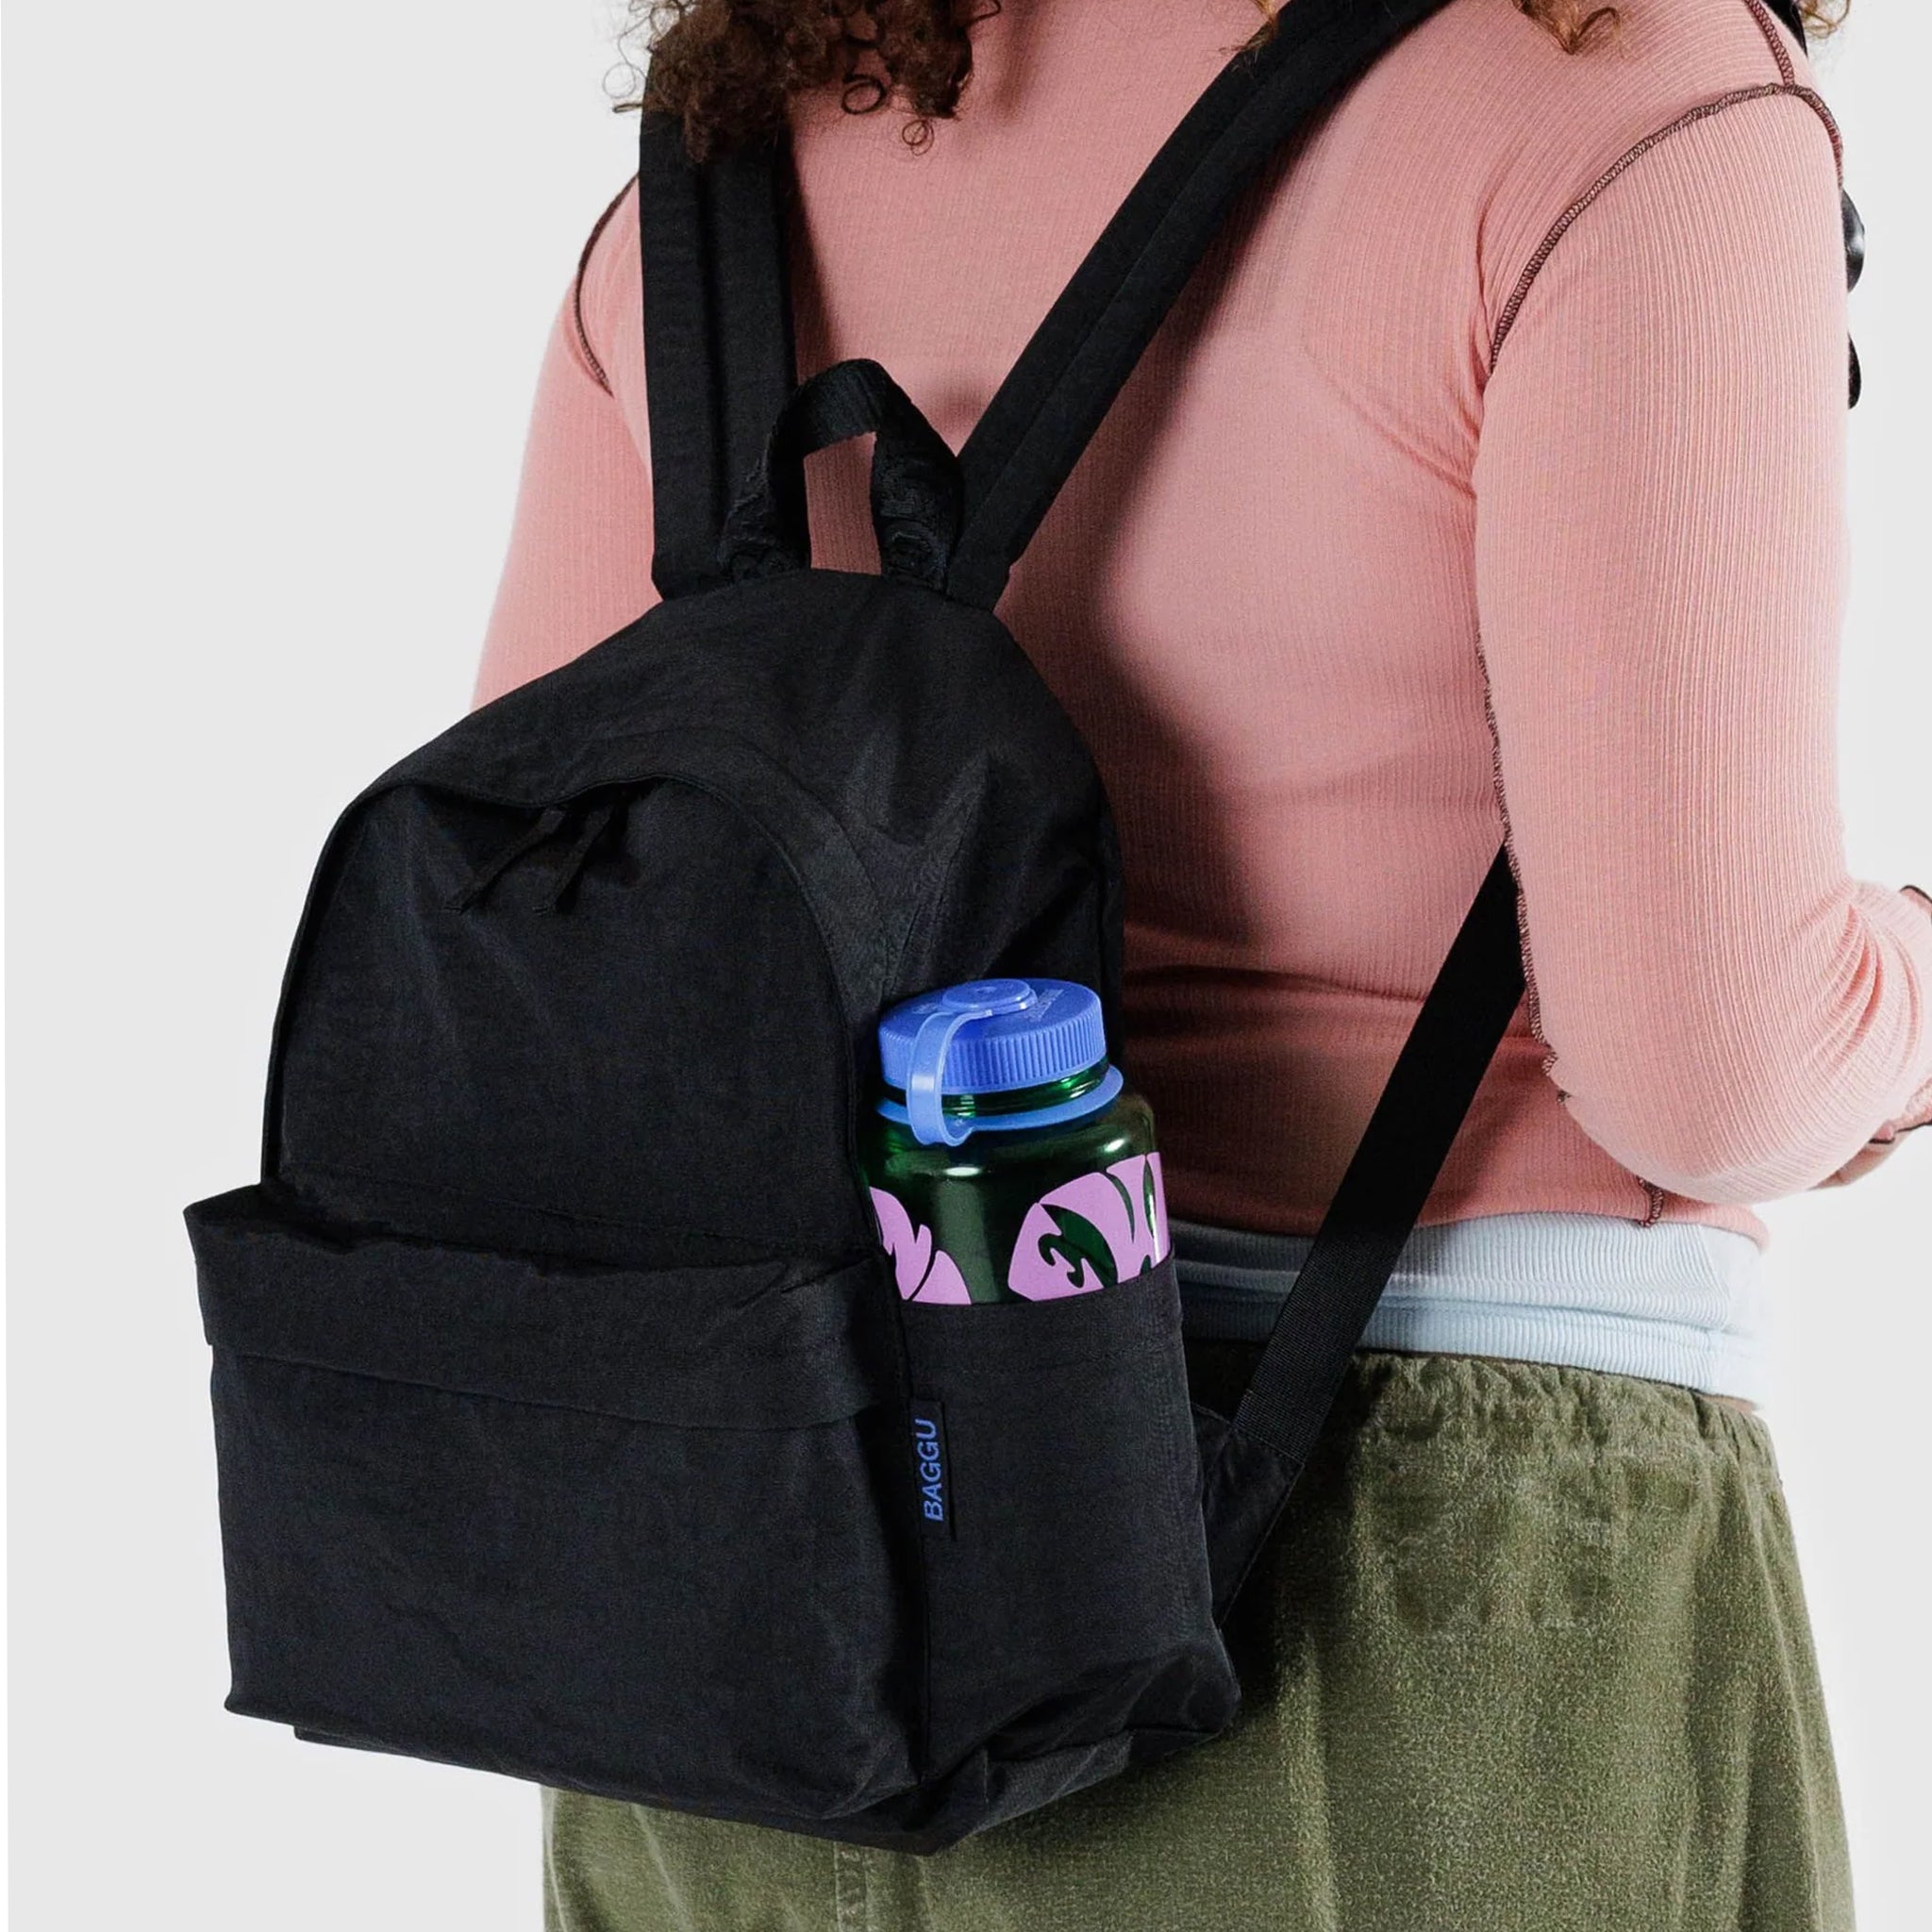 A black nylon backpack with two front zipper compartments and side pockets.